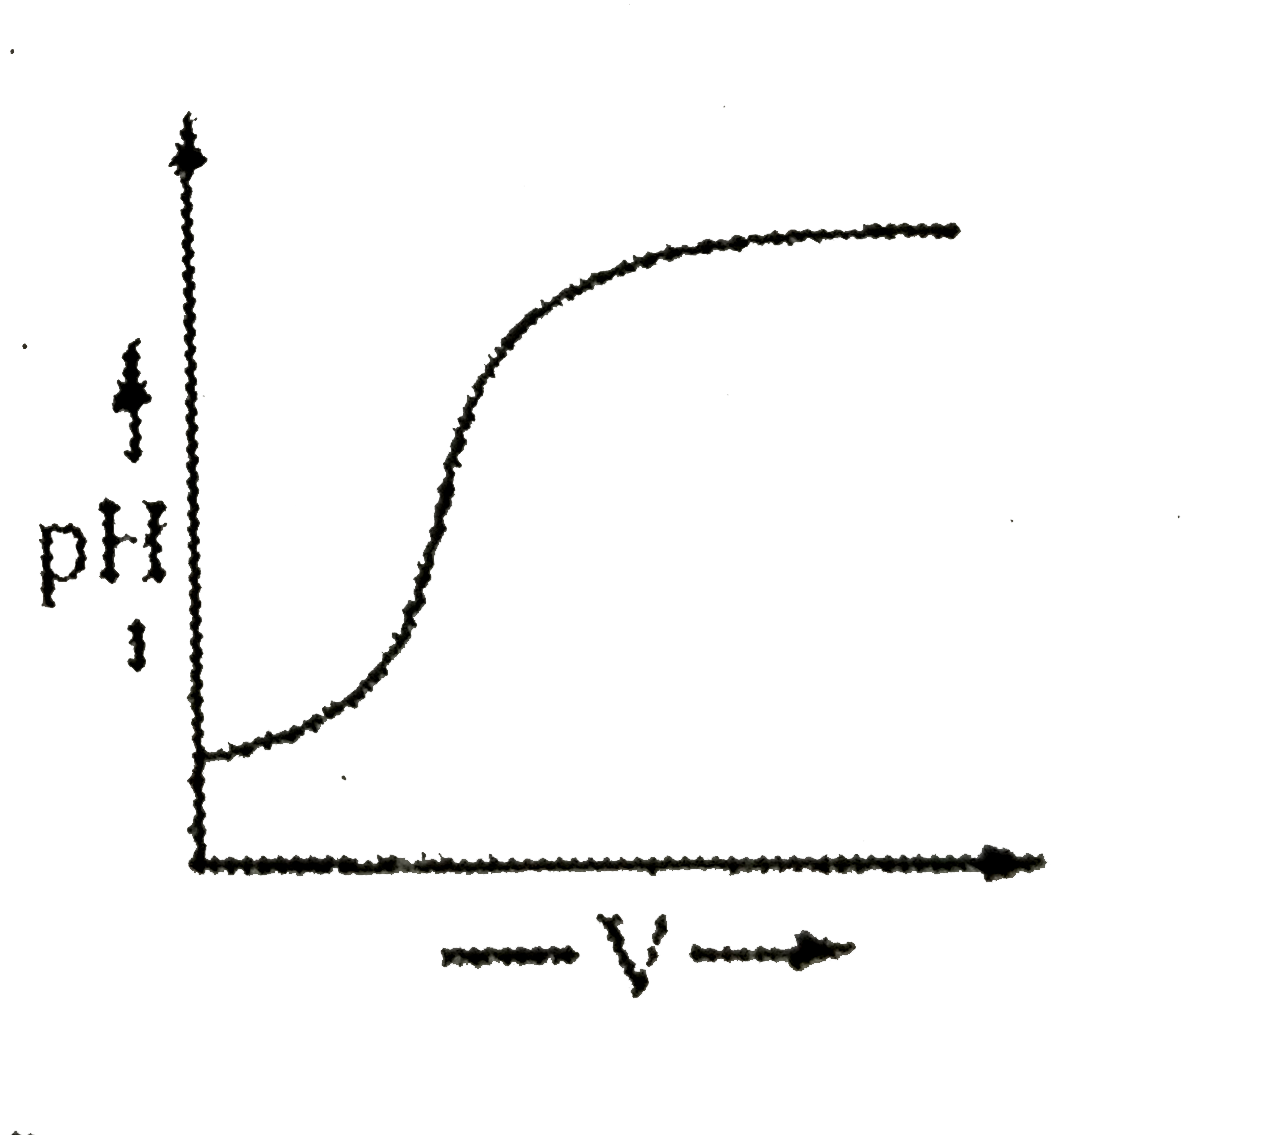 During titration of acetic acid with aq. NaOH solution, the neutralisation graph has a vertical line. This line indicates